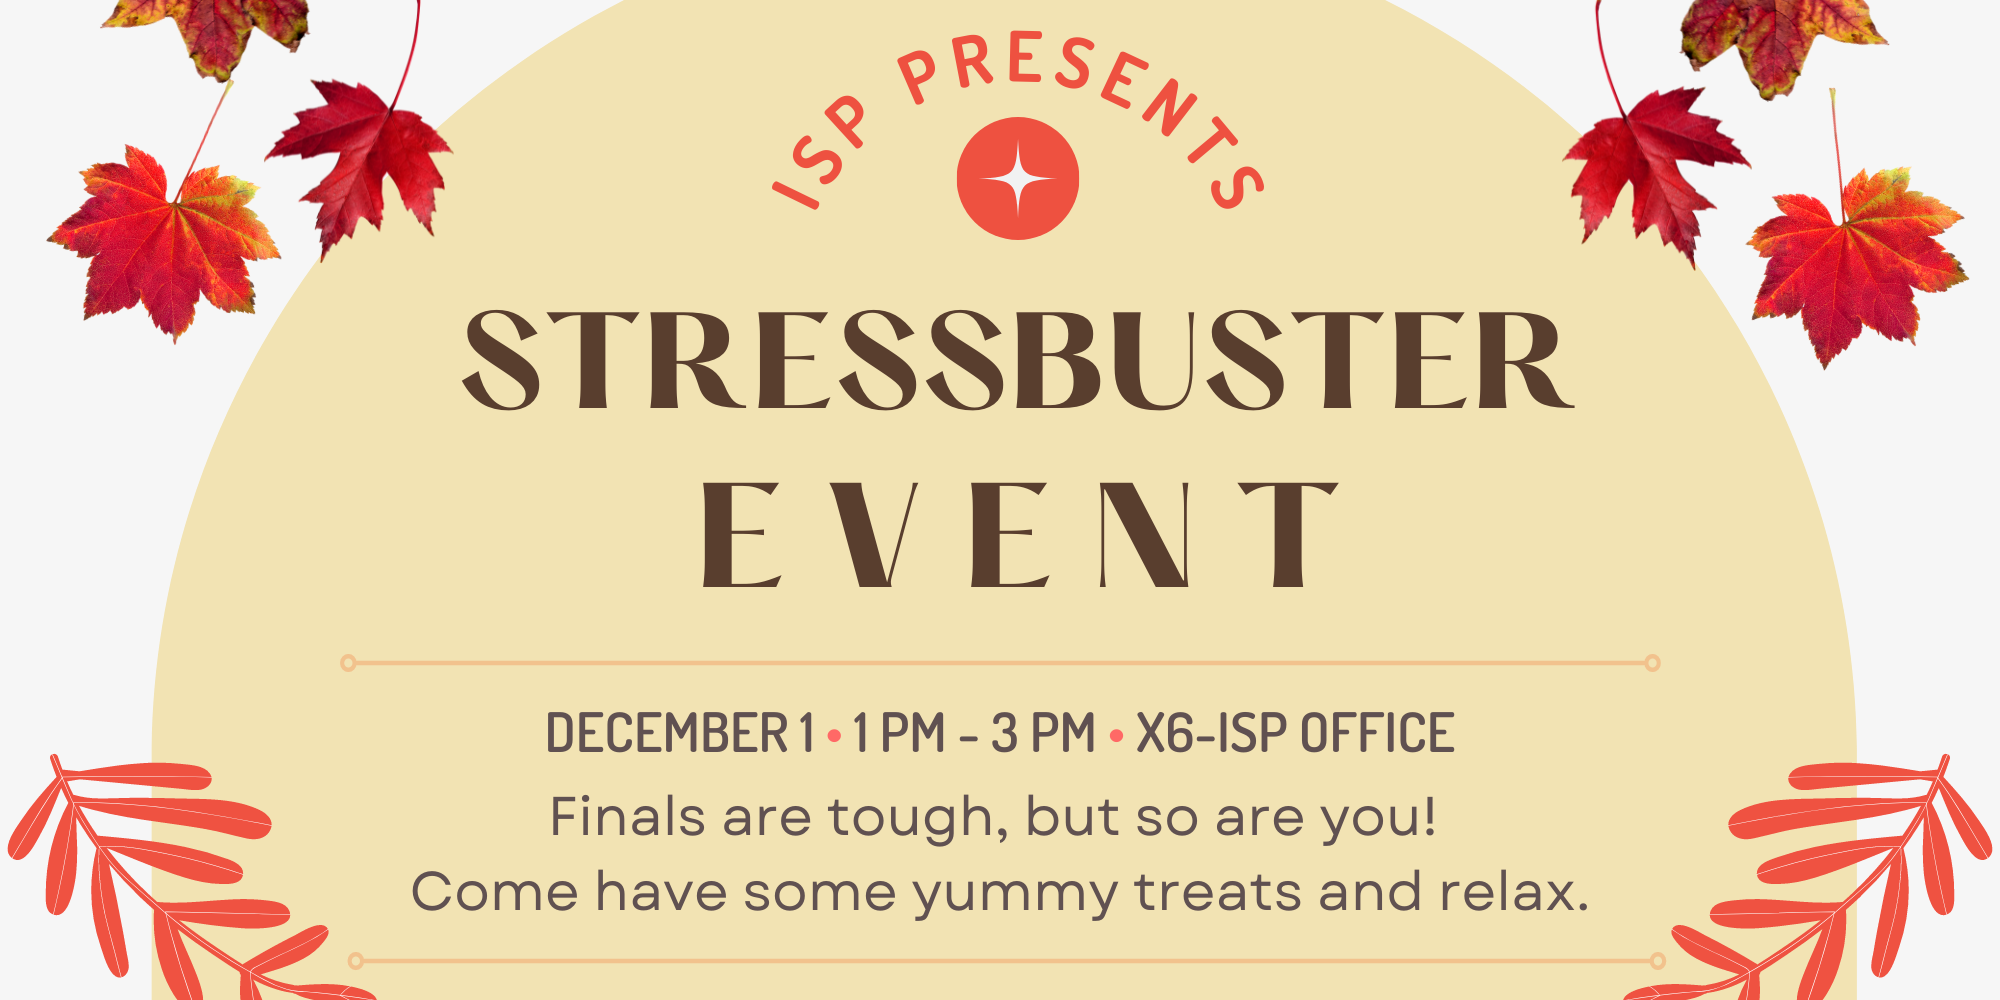 Stressbuster Event